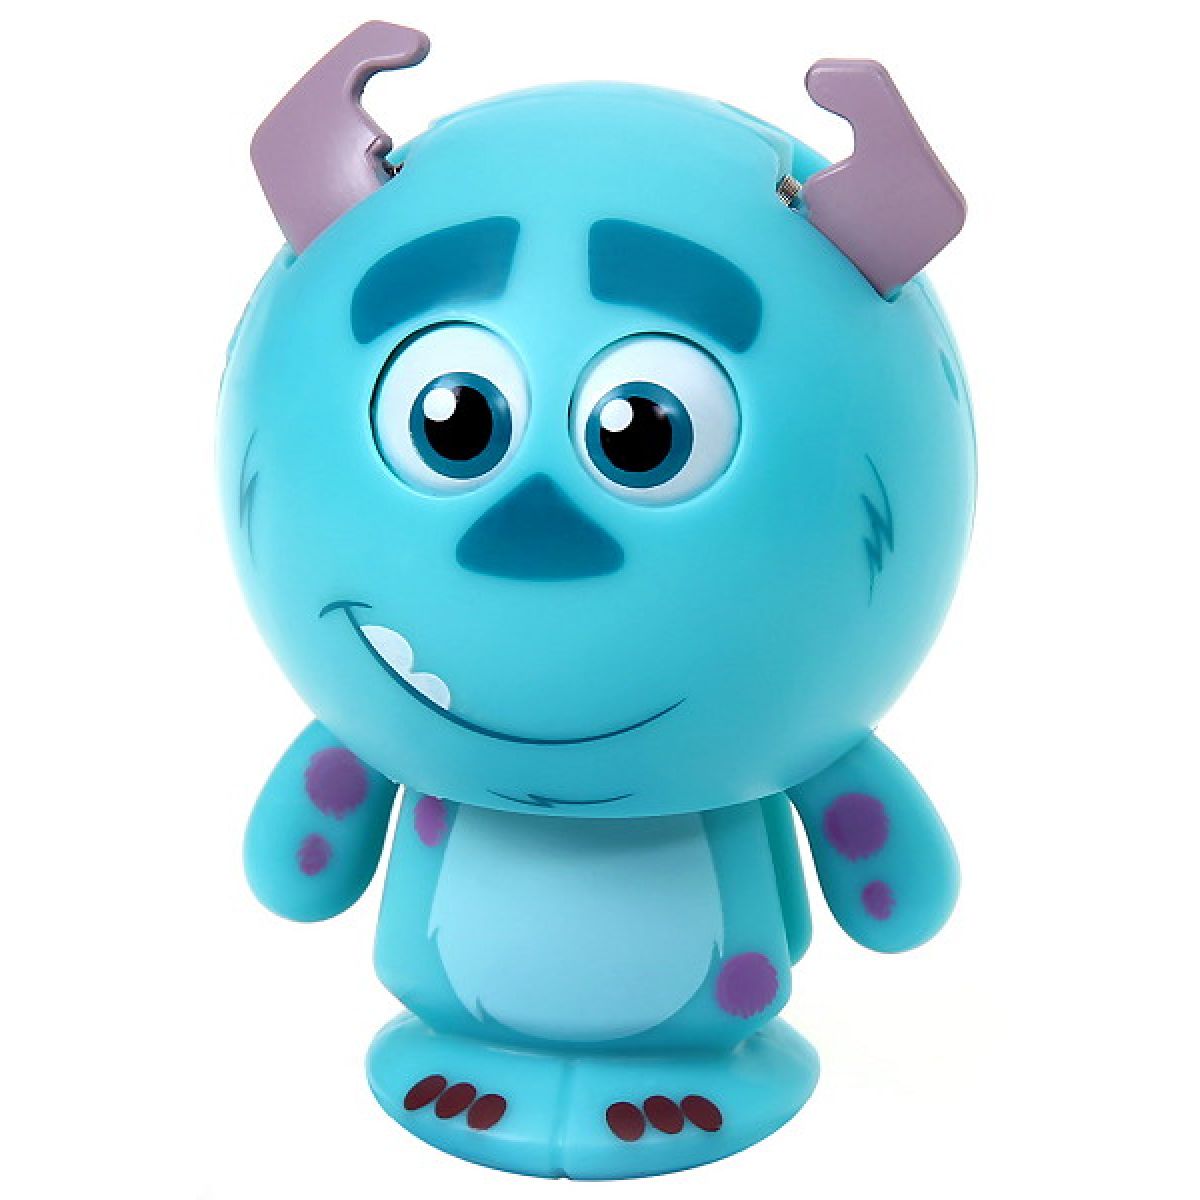 SpinMaster Roll a Scare figurky koule Sulley